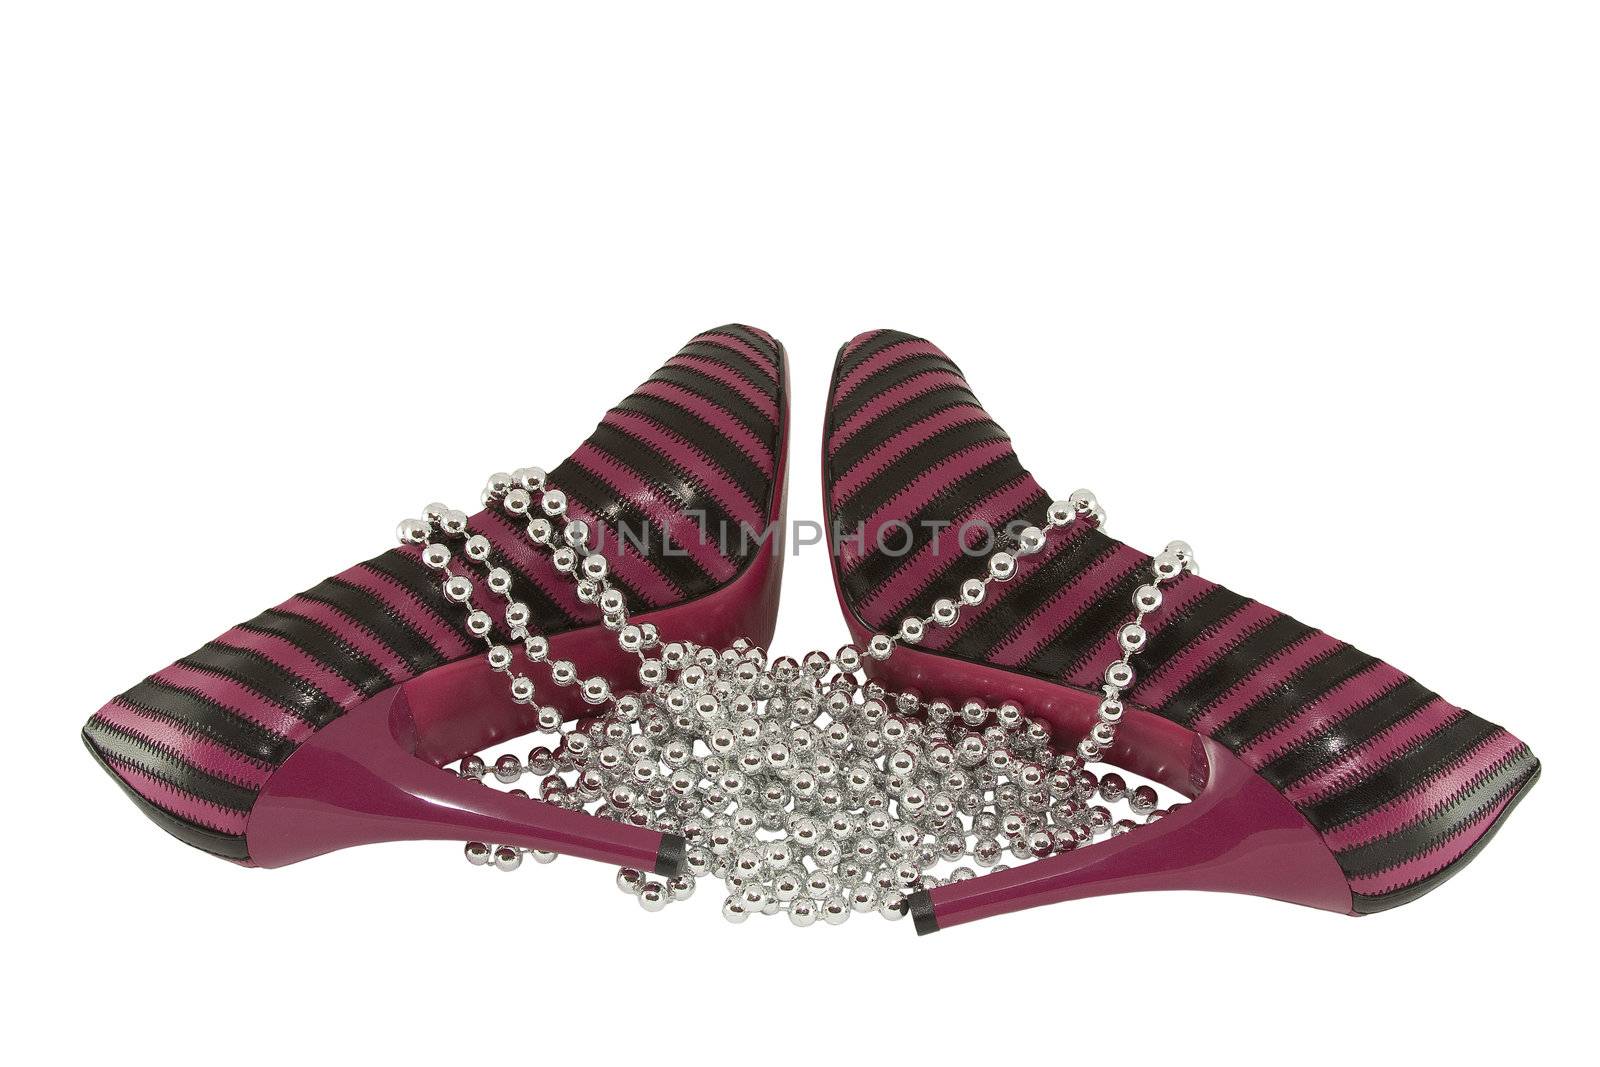 beads and two shoe black and pink isolated